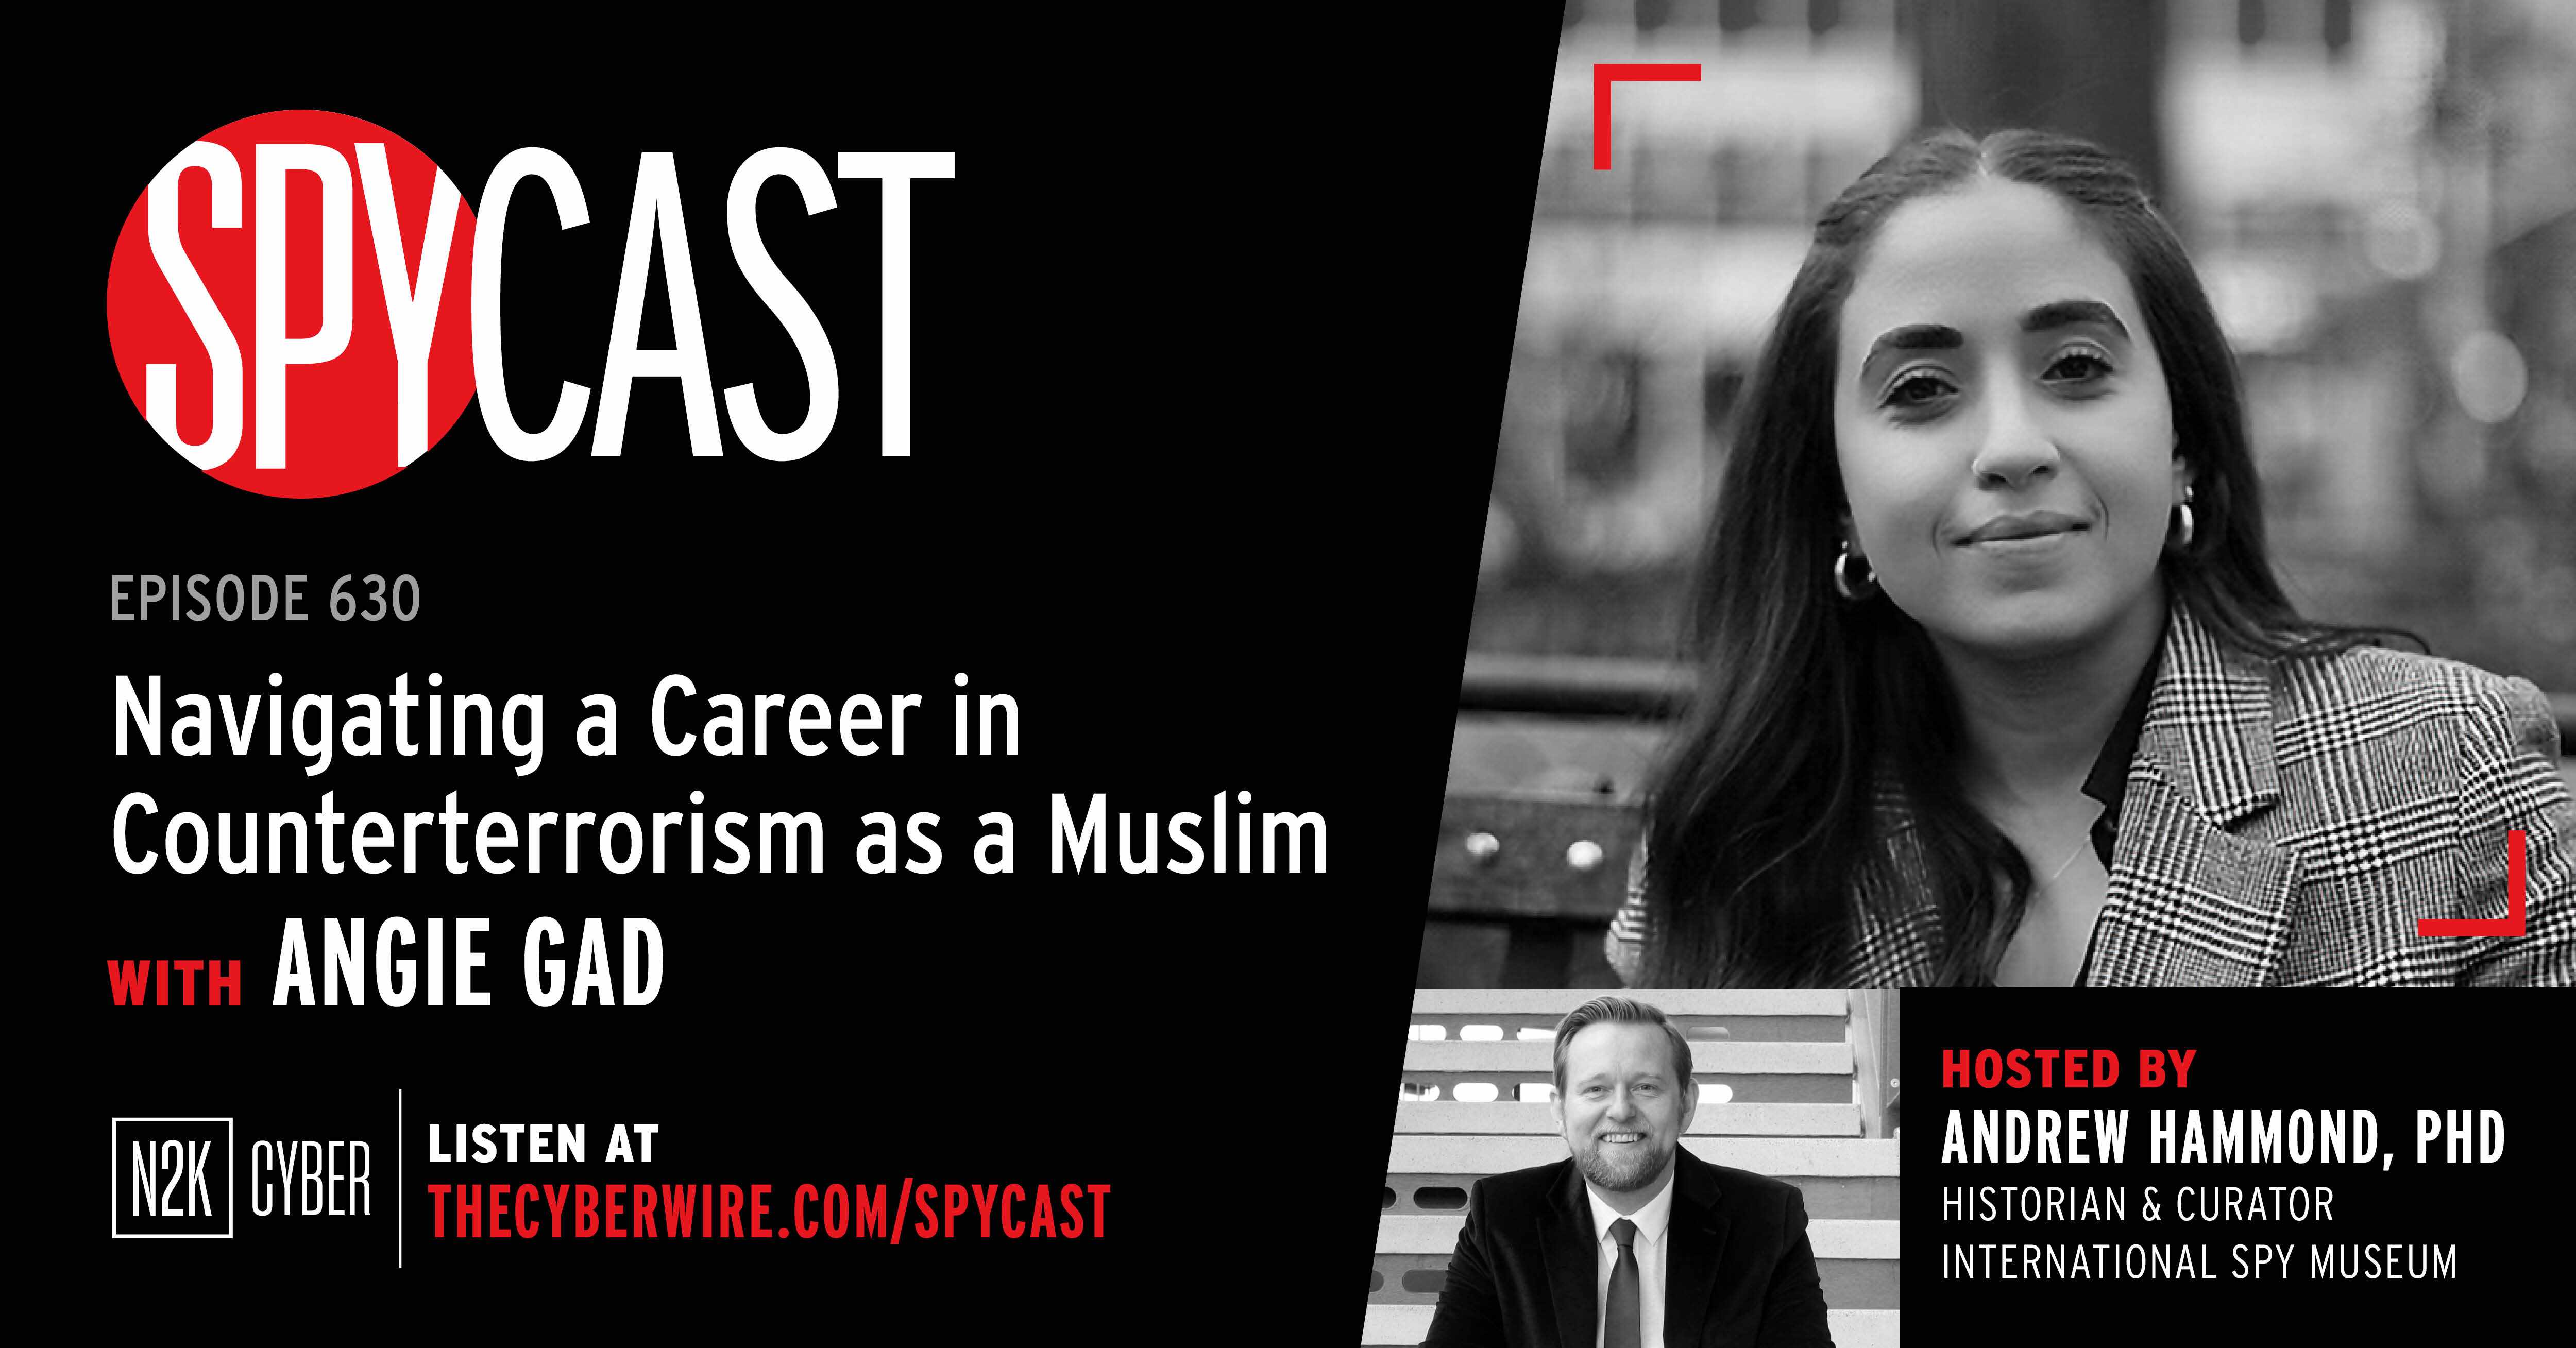 “Navigating a Career in Counterterrorism as a Muslim – with Angie Gad”